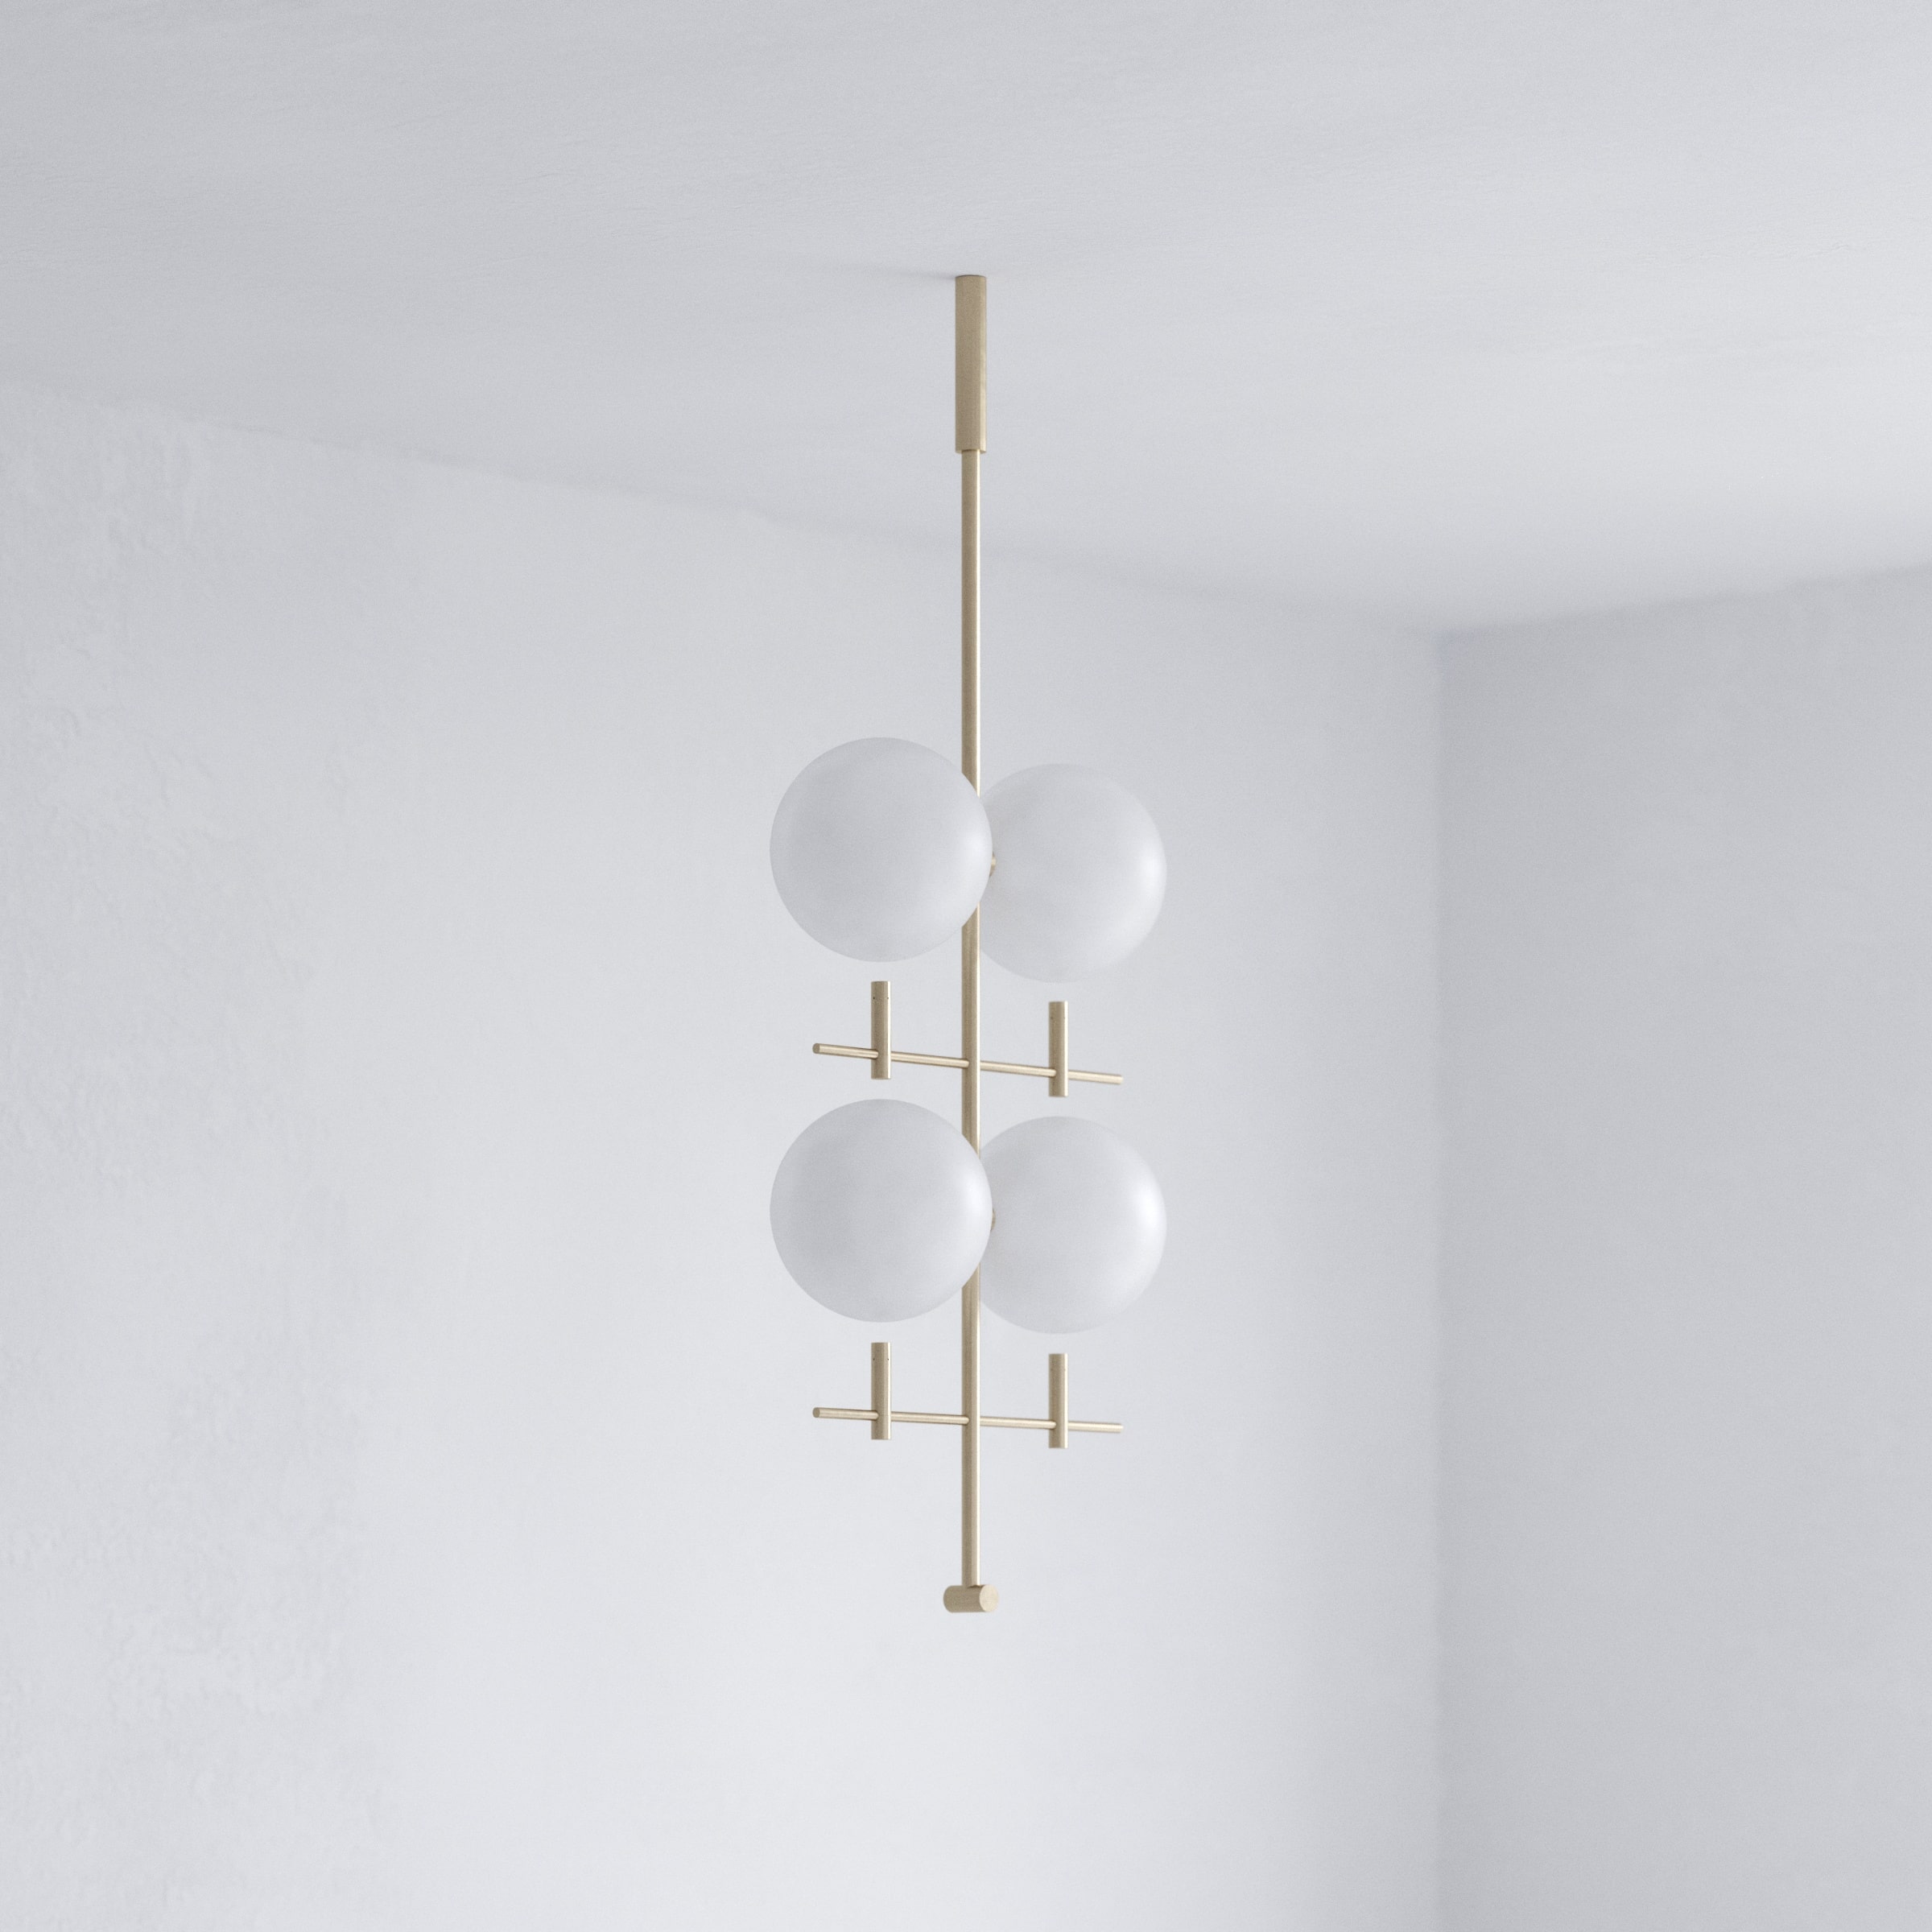 Handmade Luna Luminaries Collection of Lightning made of Glass and Brass Four Lamps in Golden Edition